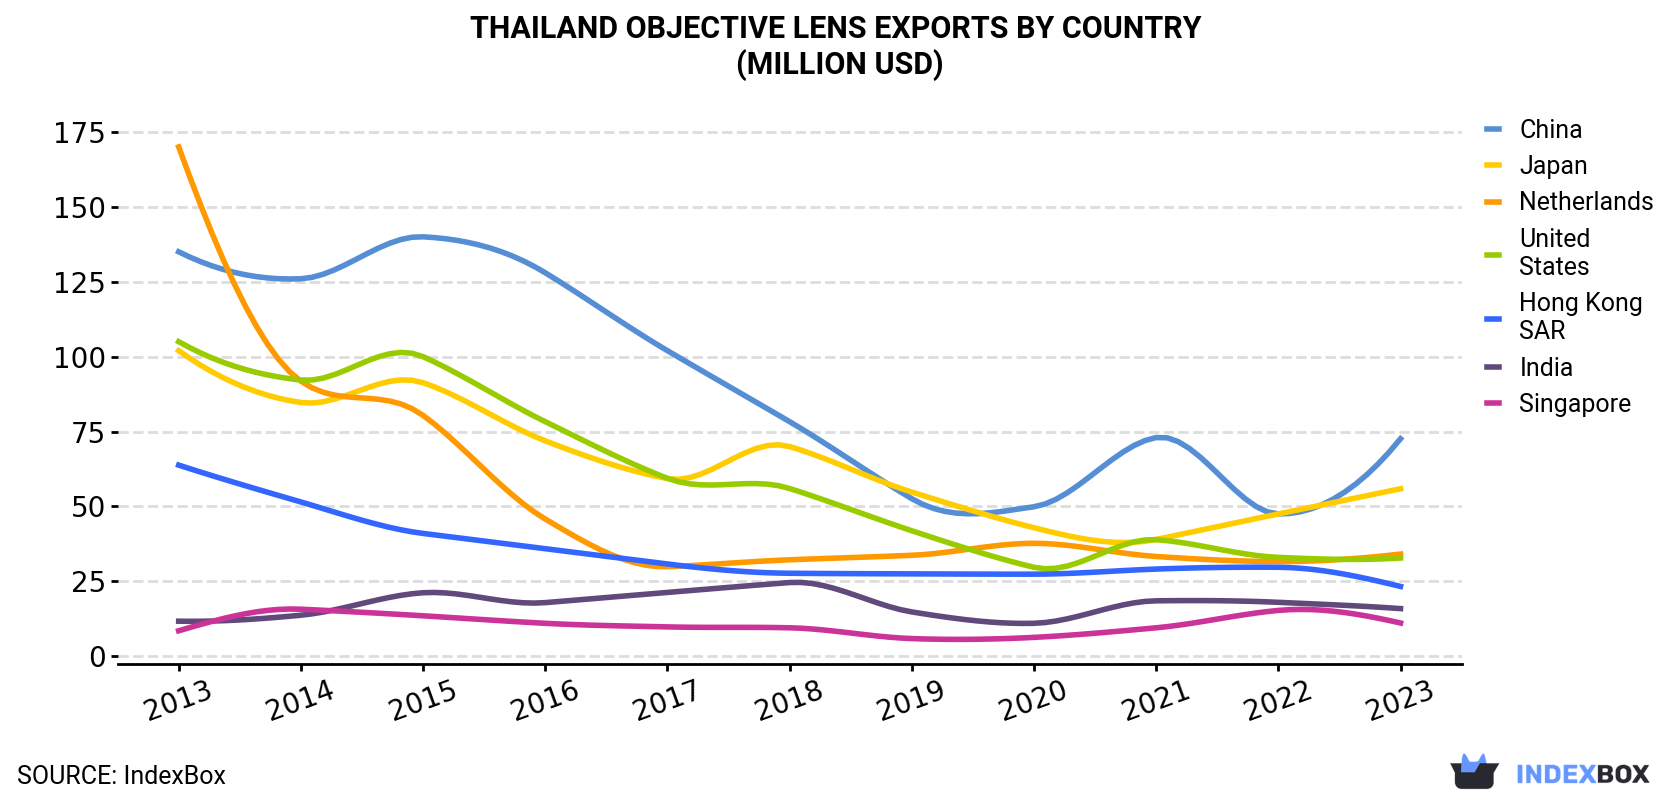 Thailand Objective Lens Exports By Country (Million USD)